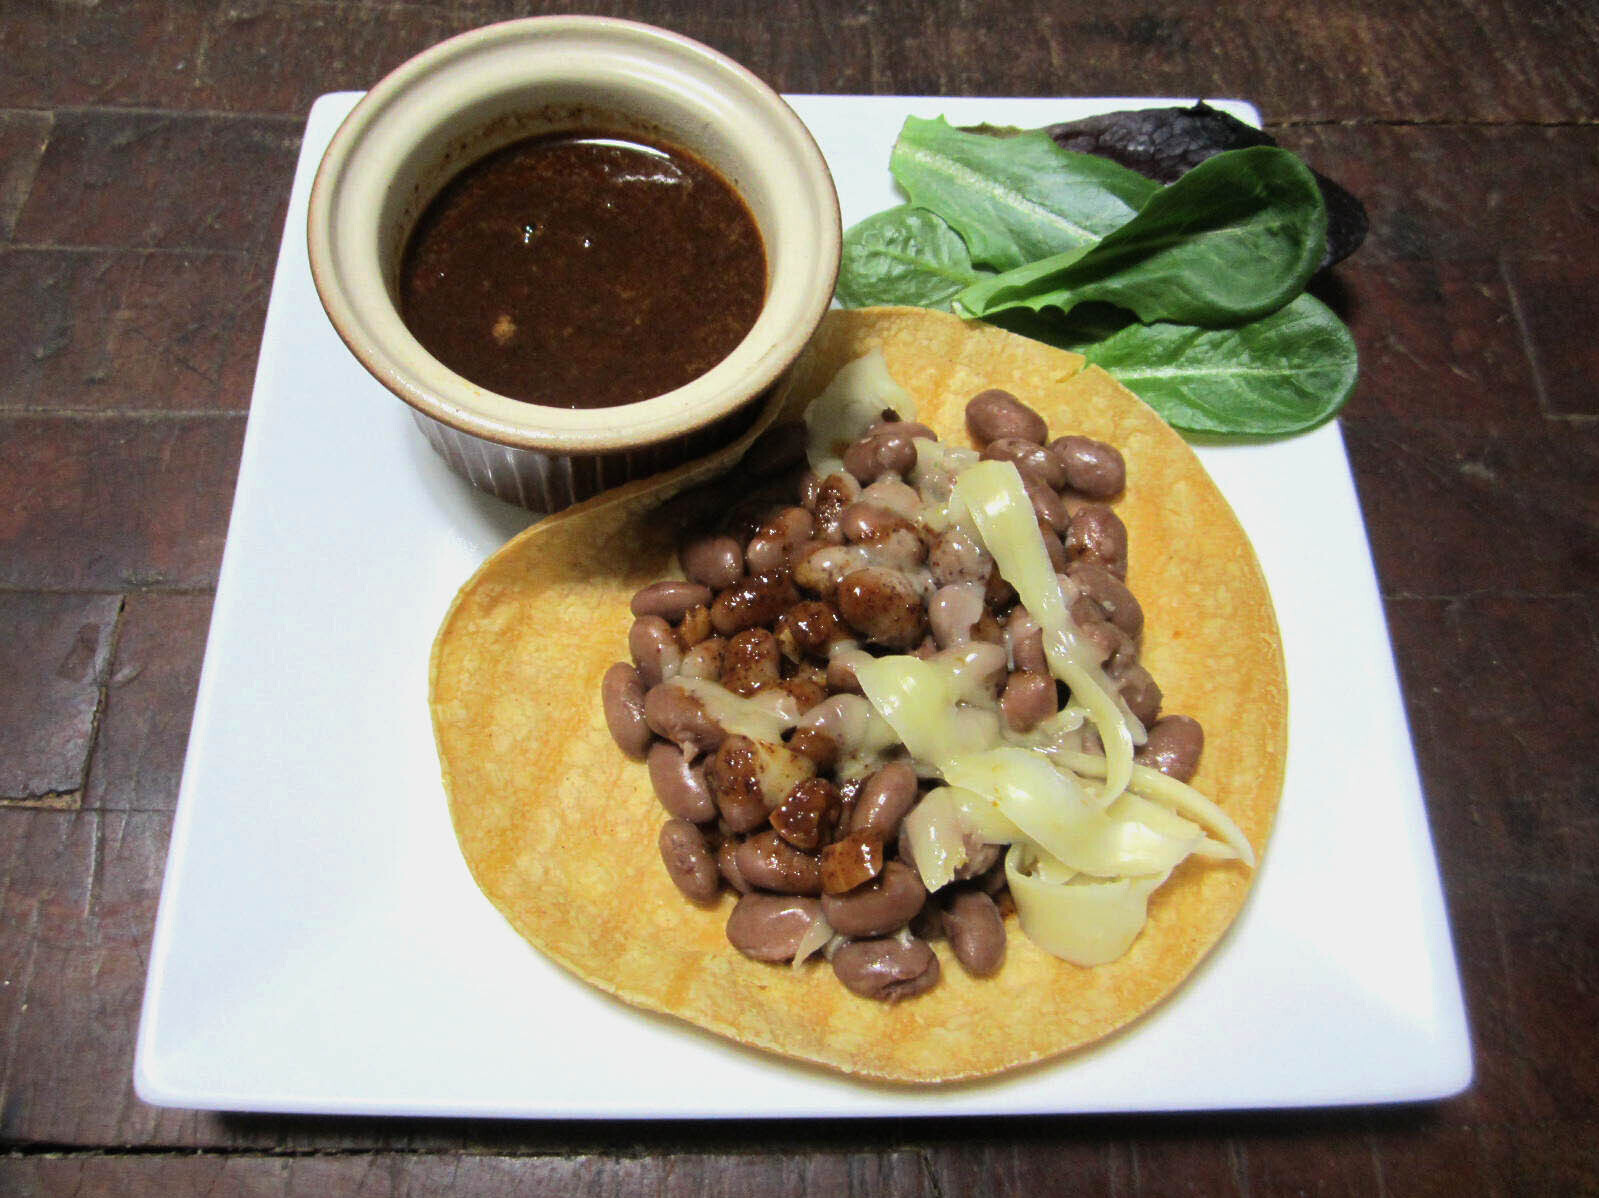 Tortilla served with beans, cheese, lettuce, and sauce